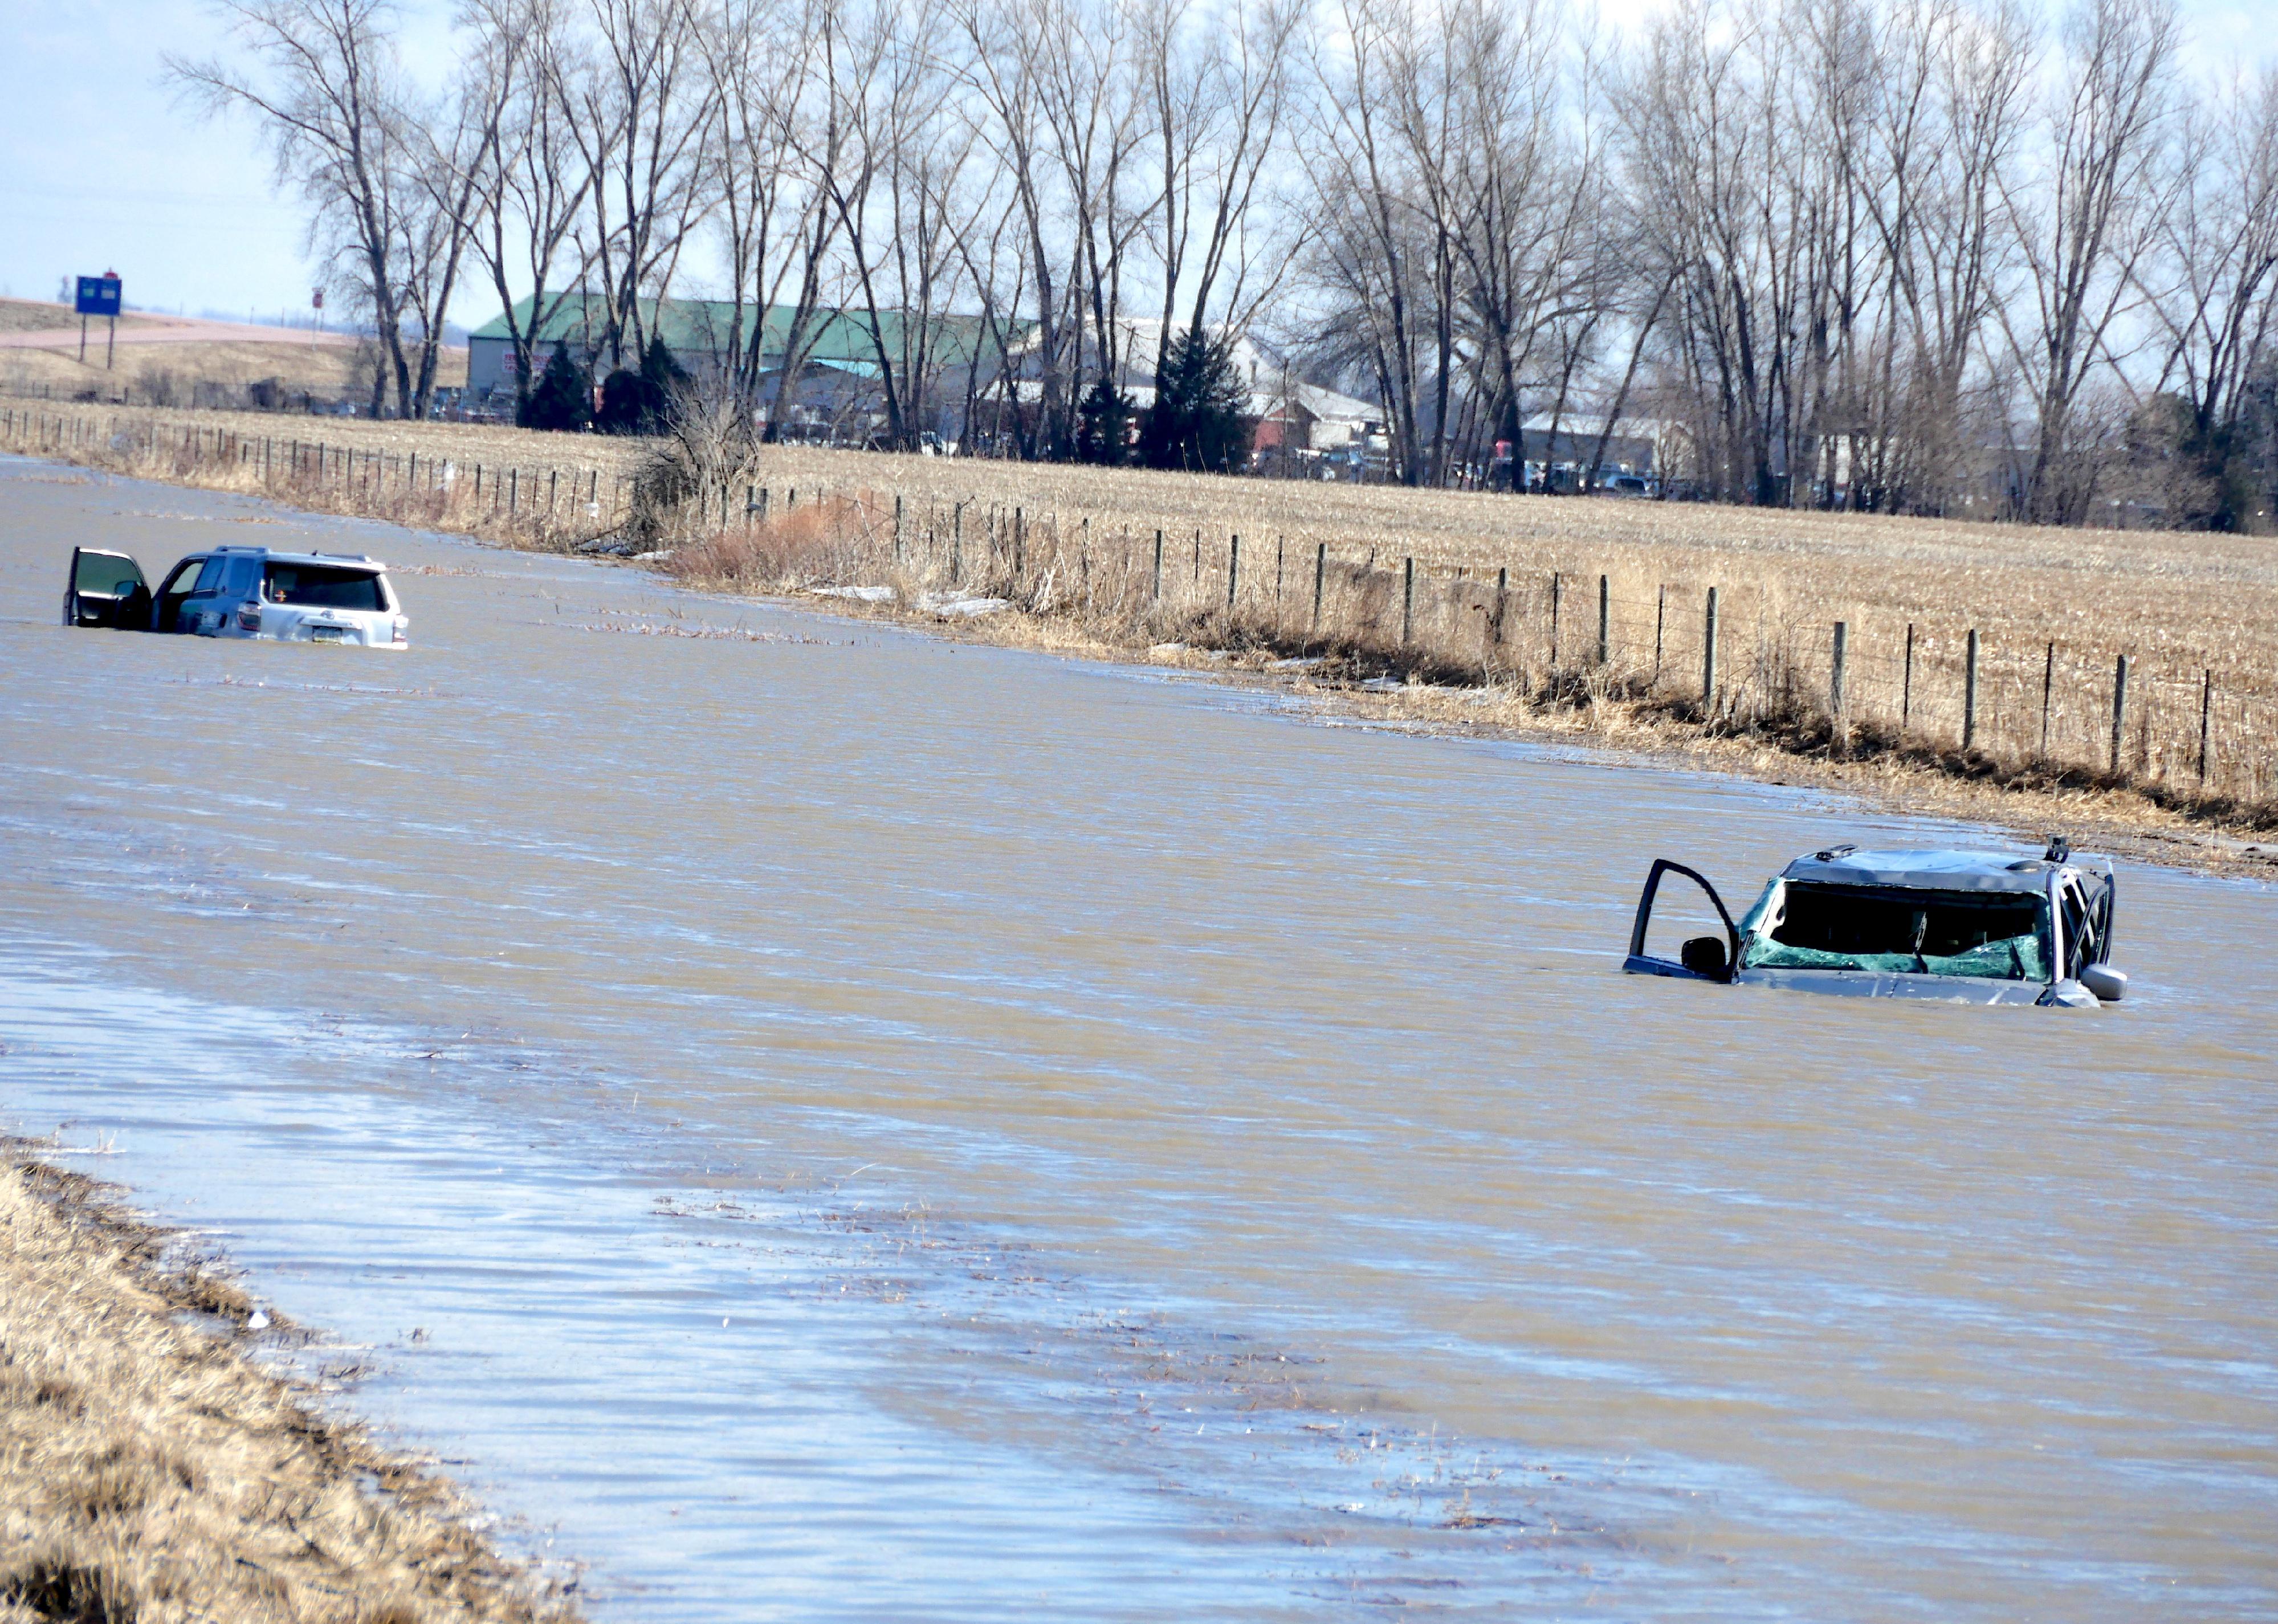 Two cars completely submerged in water next to South Dakota I-29.